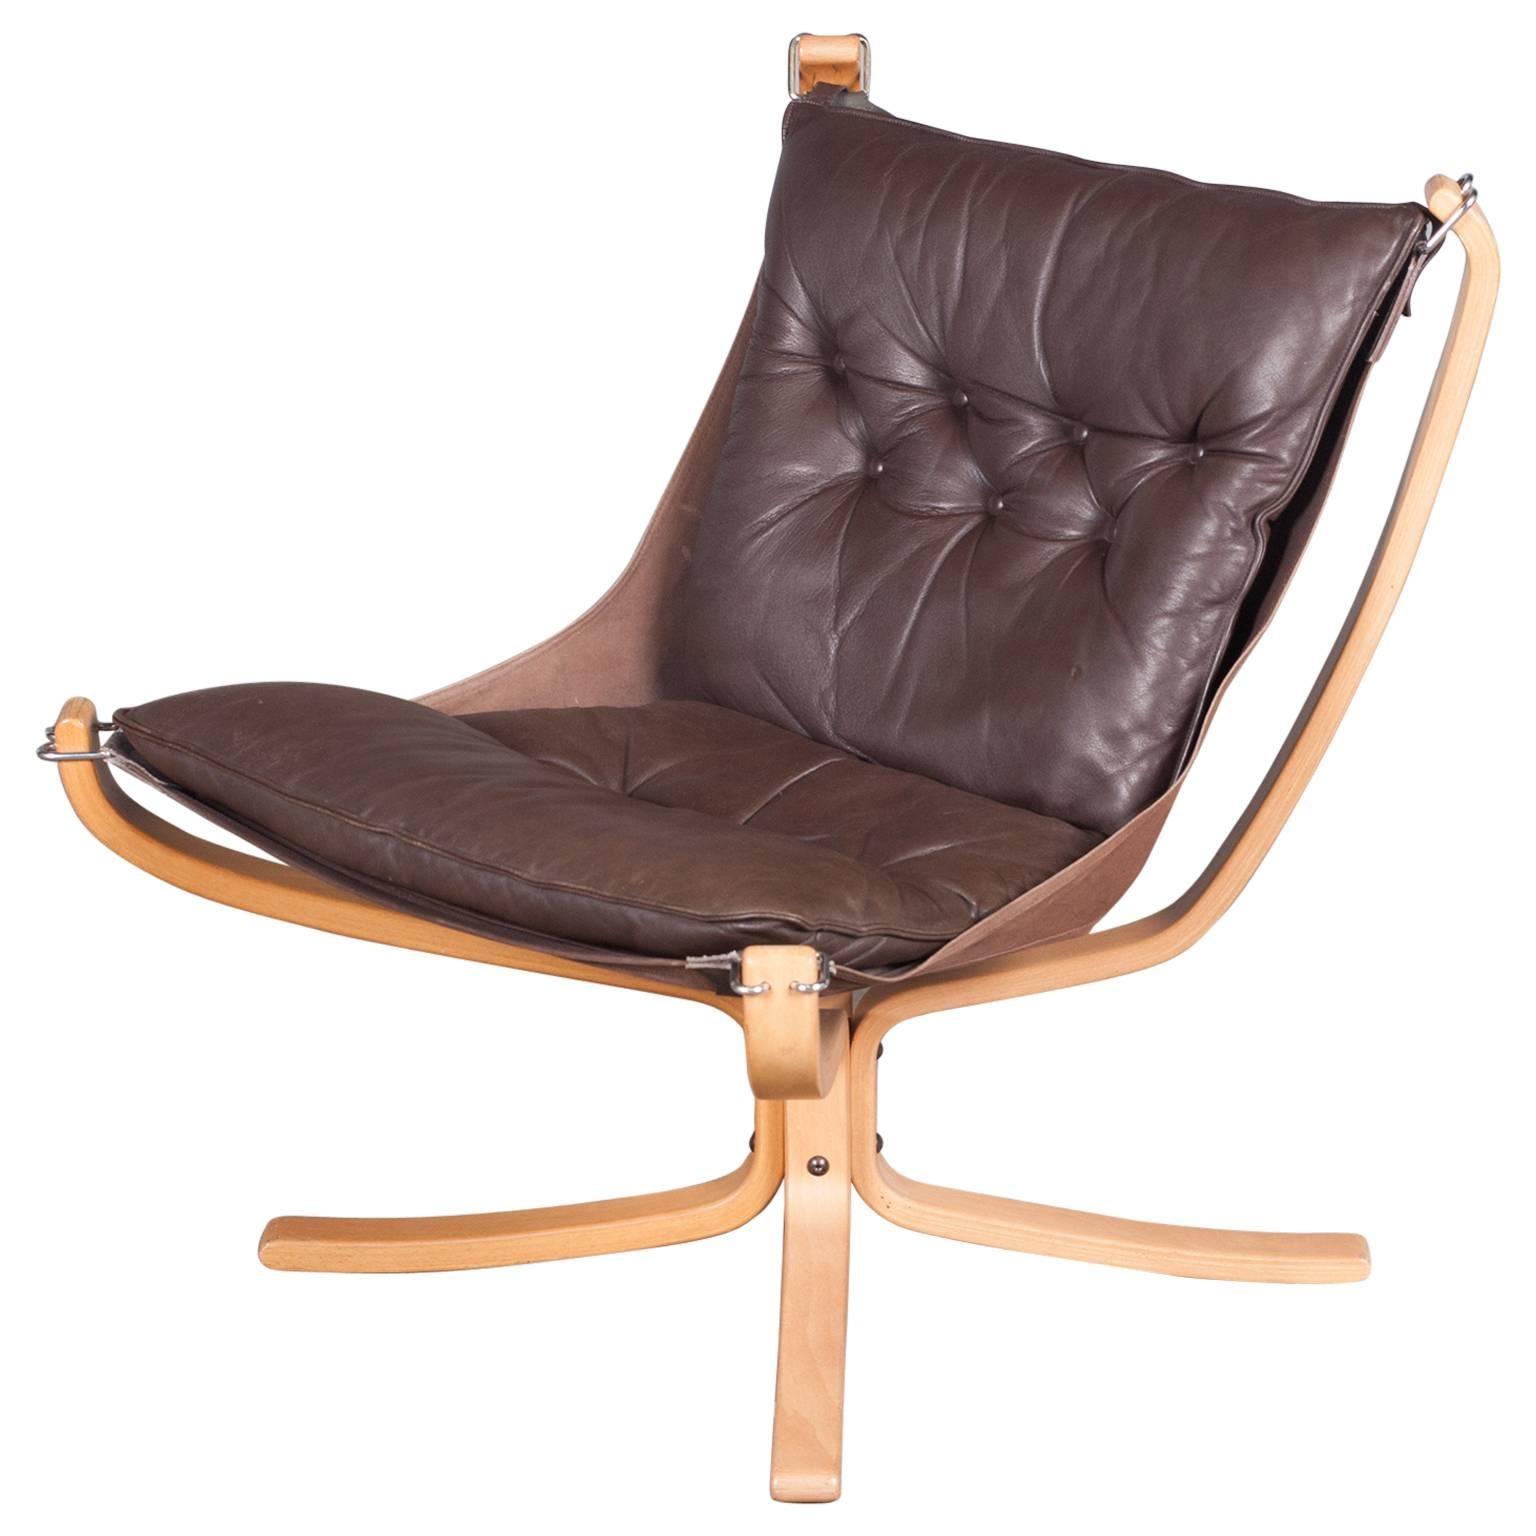 Norwegian Falcon Chair in Chocolate Brown Leather by Sigurd Ressel, 1971 For Sale